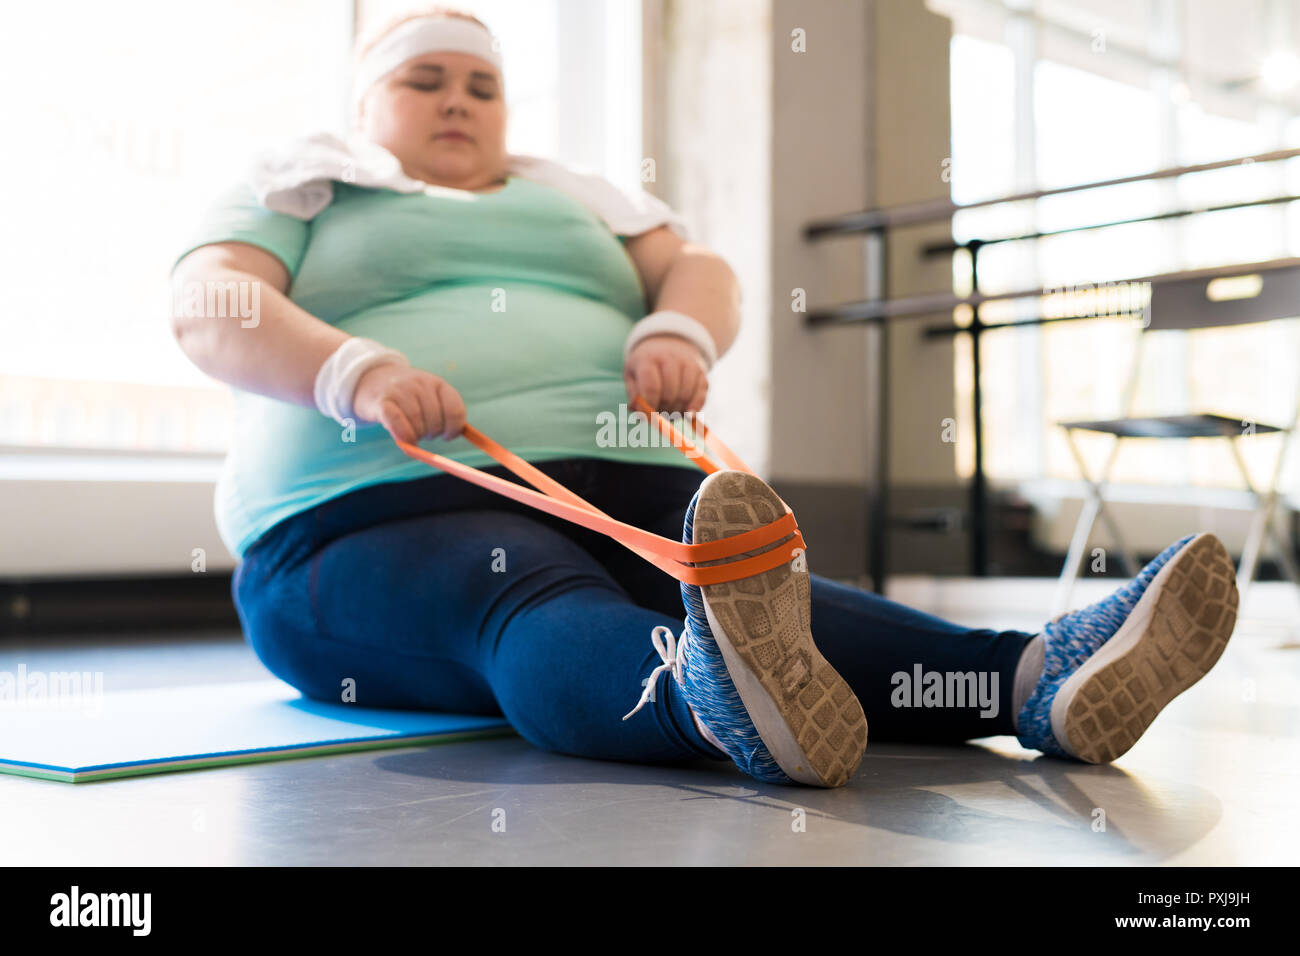 Obese Woman Training in Fitness Class Stock Photo